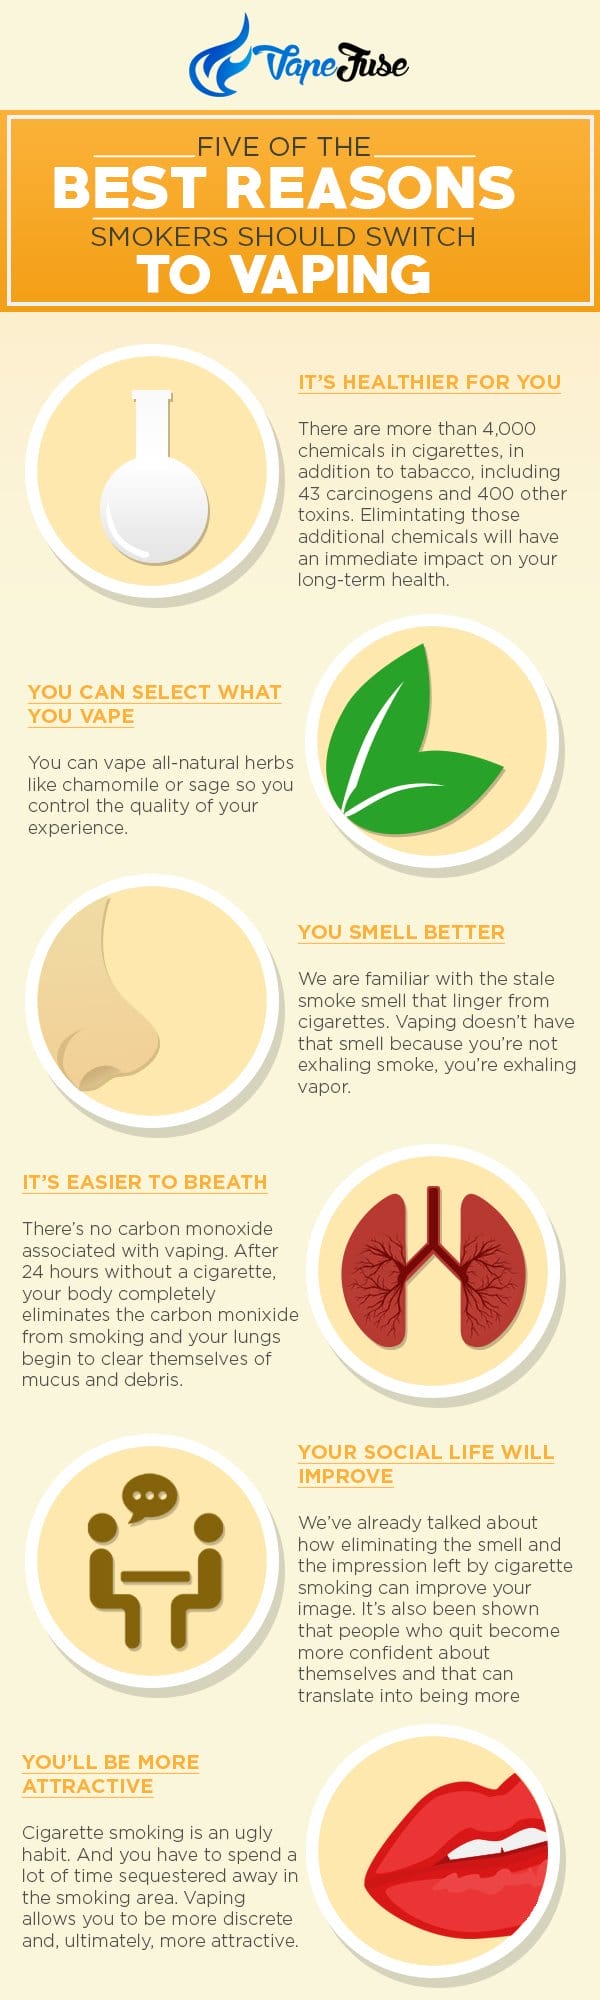 Why Vaping is a Better Alternative to Smoking